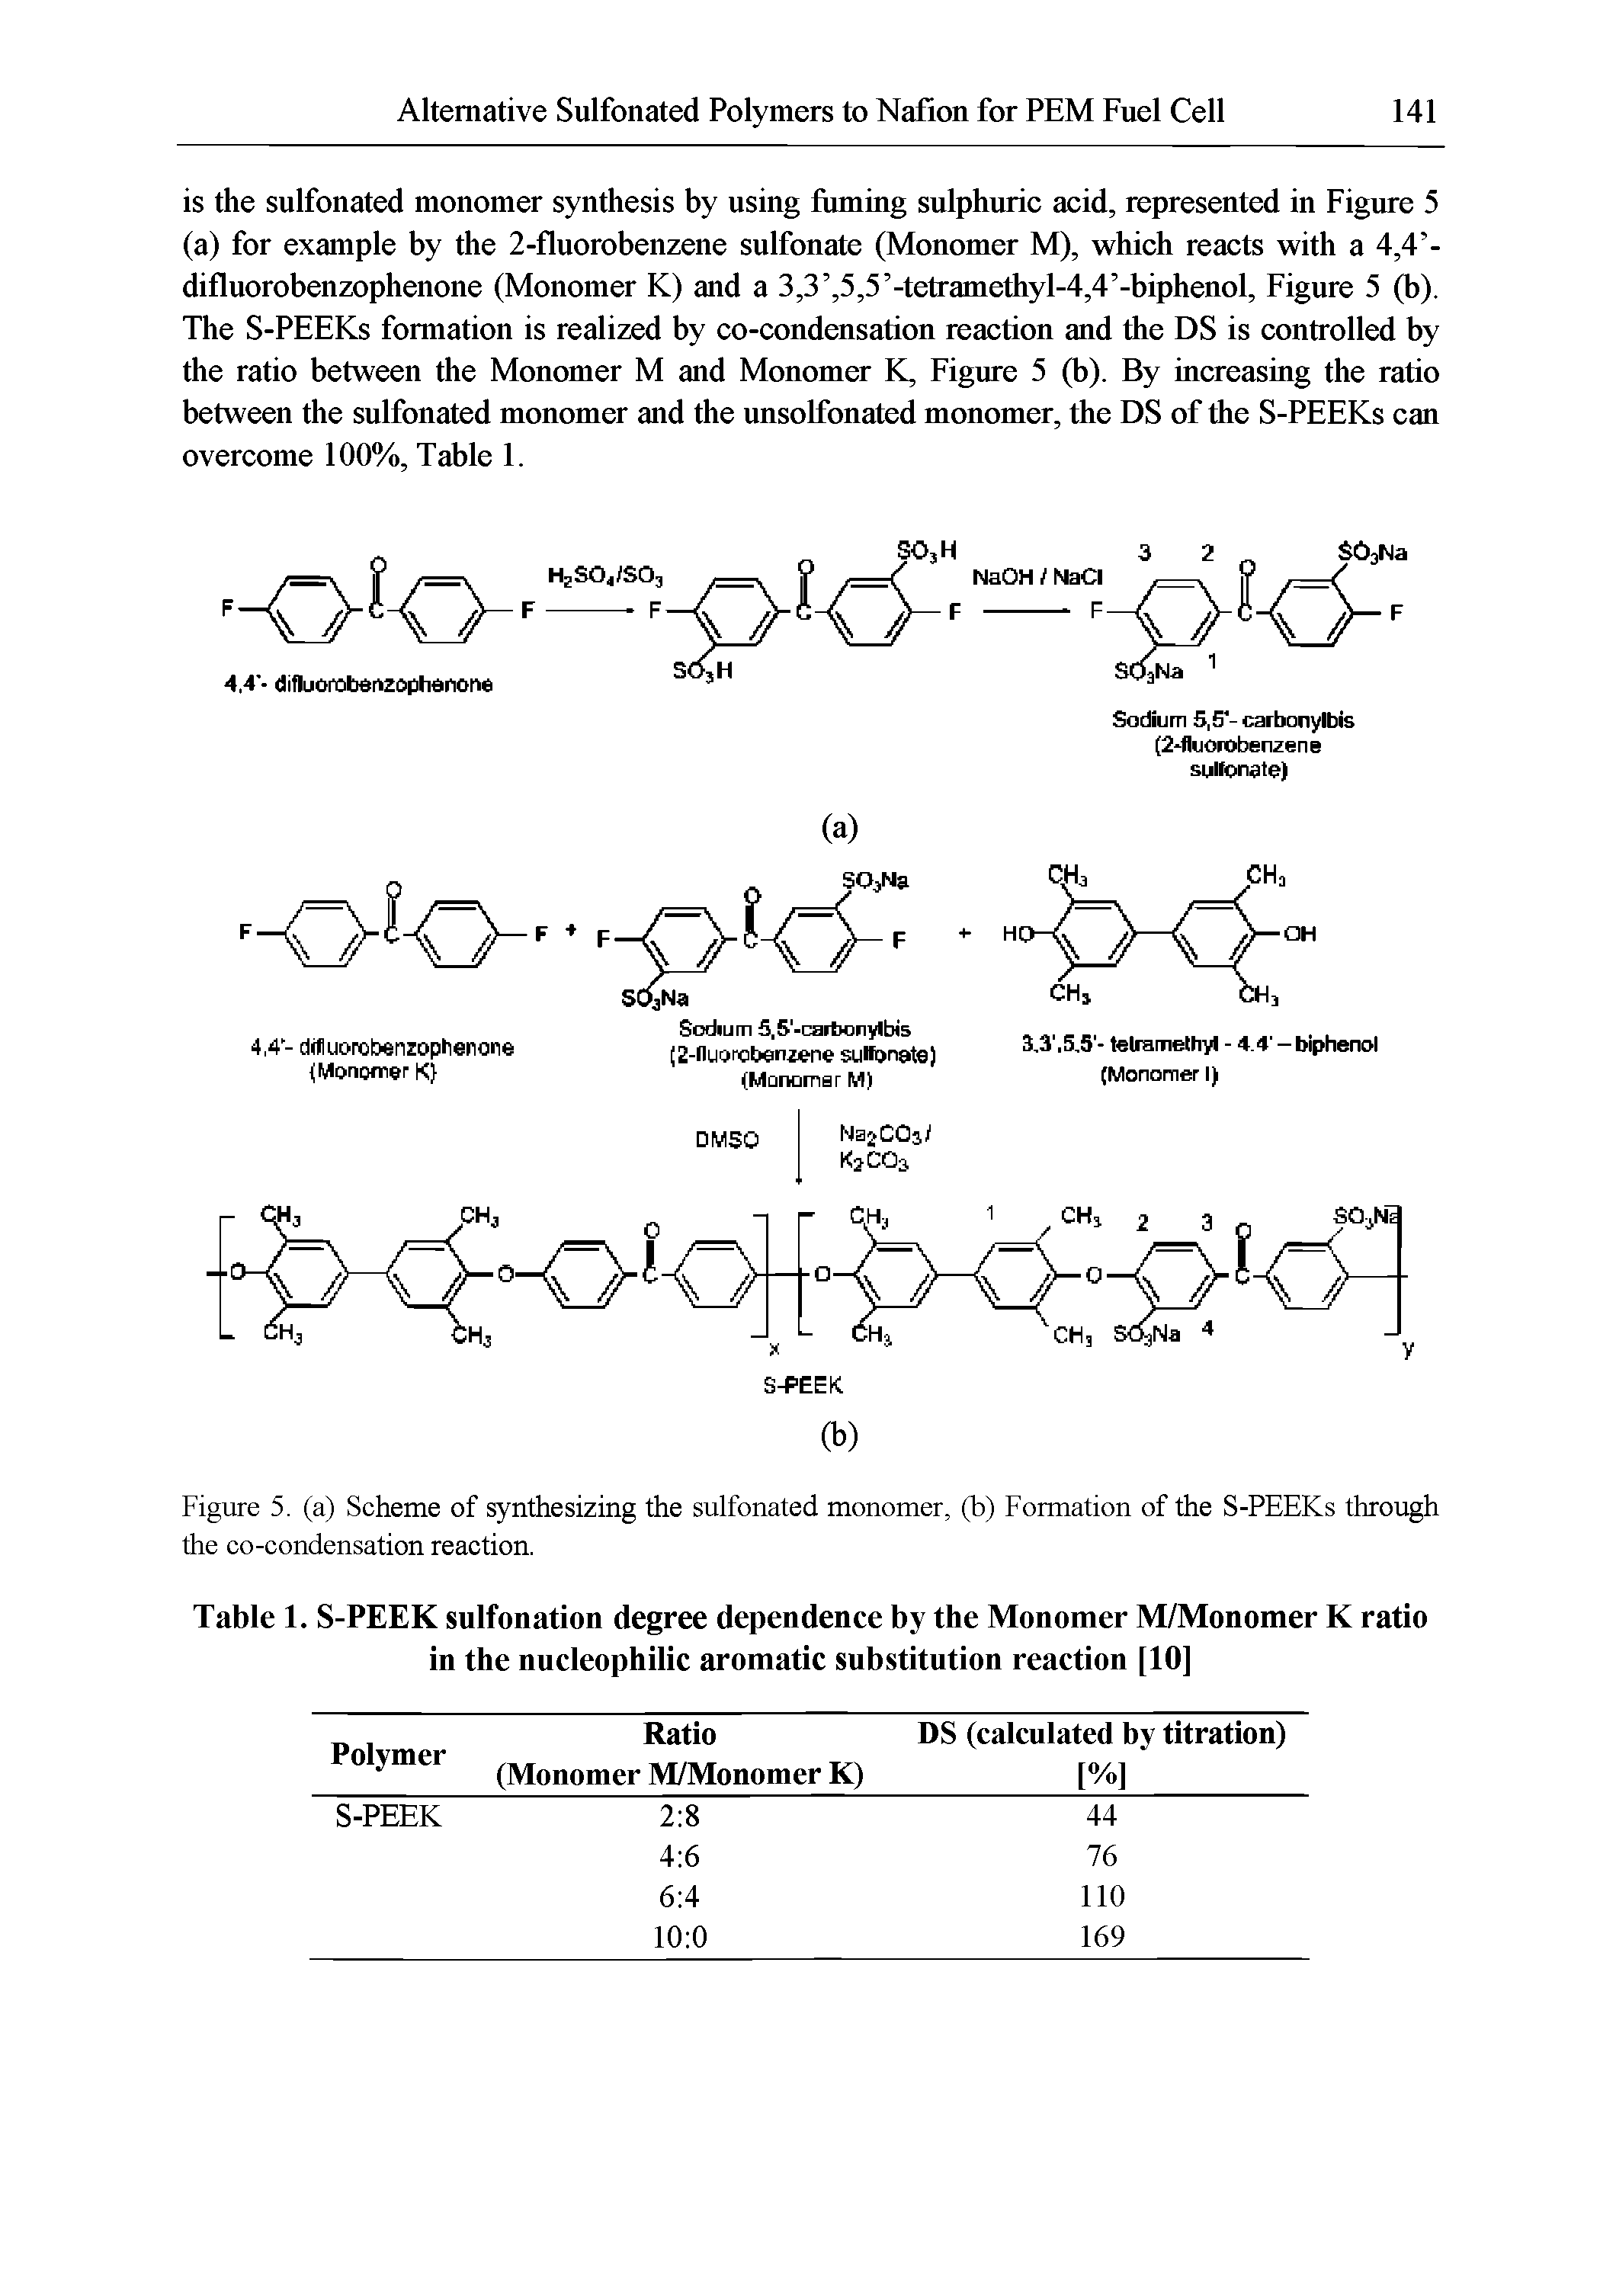 Table 1. S-PEEK sulfonation degree dependence by the Monomer M/Monomer K ratio in the nucleophilic aromatic substitution reaction [10]...